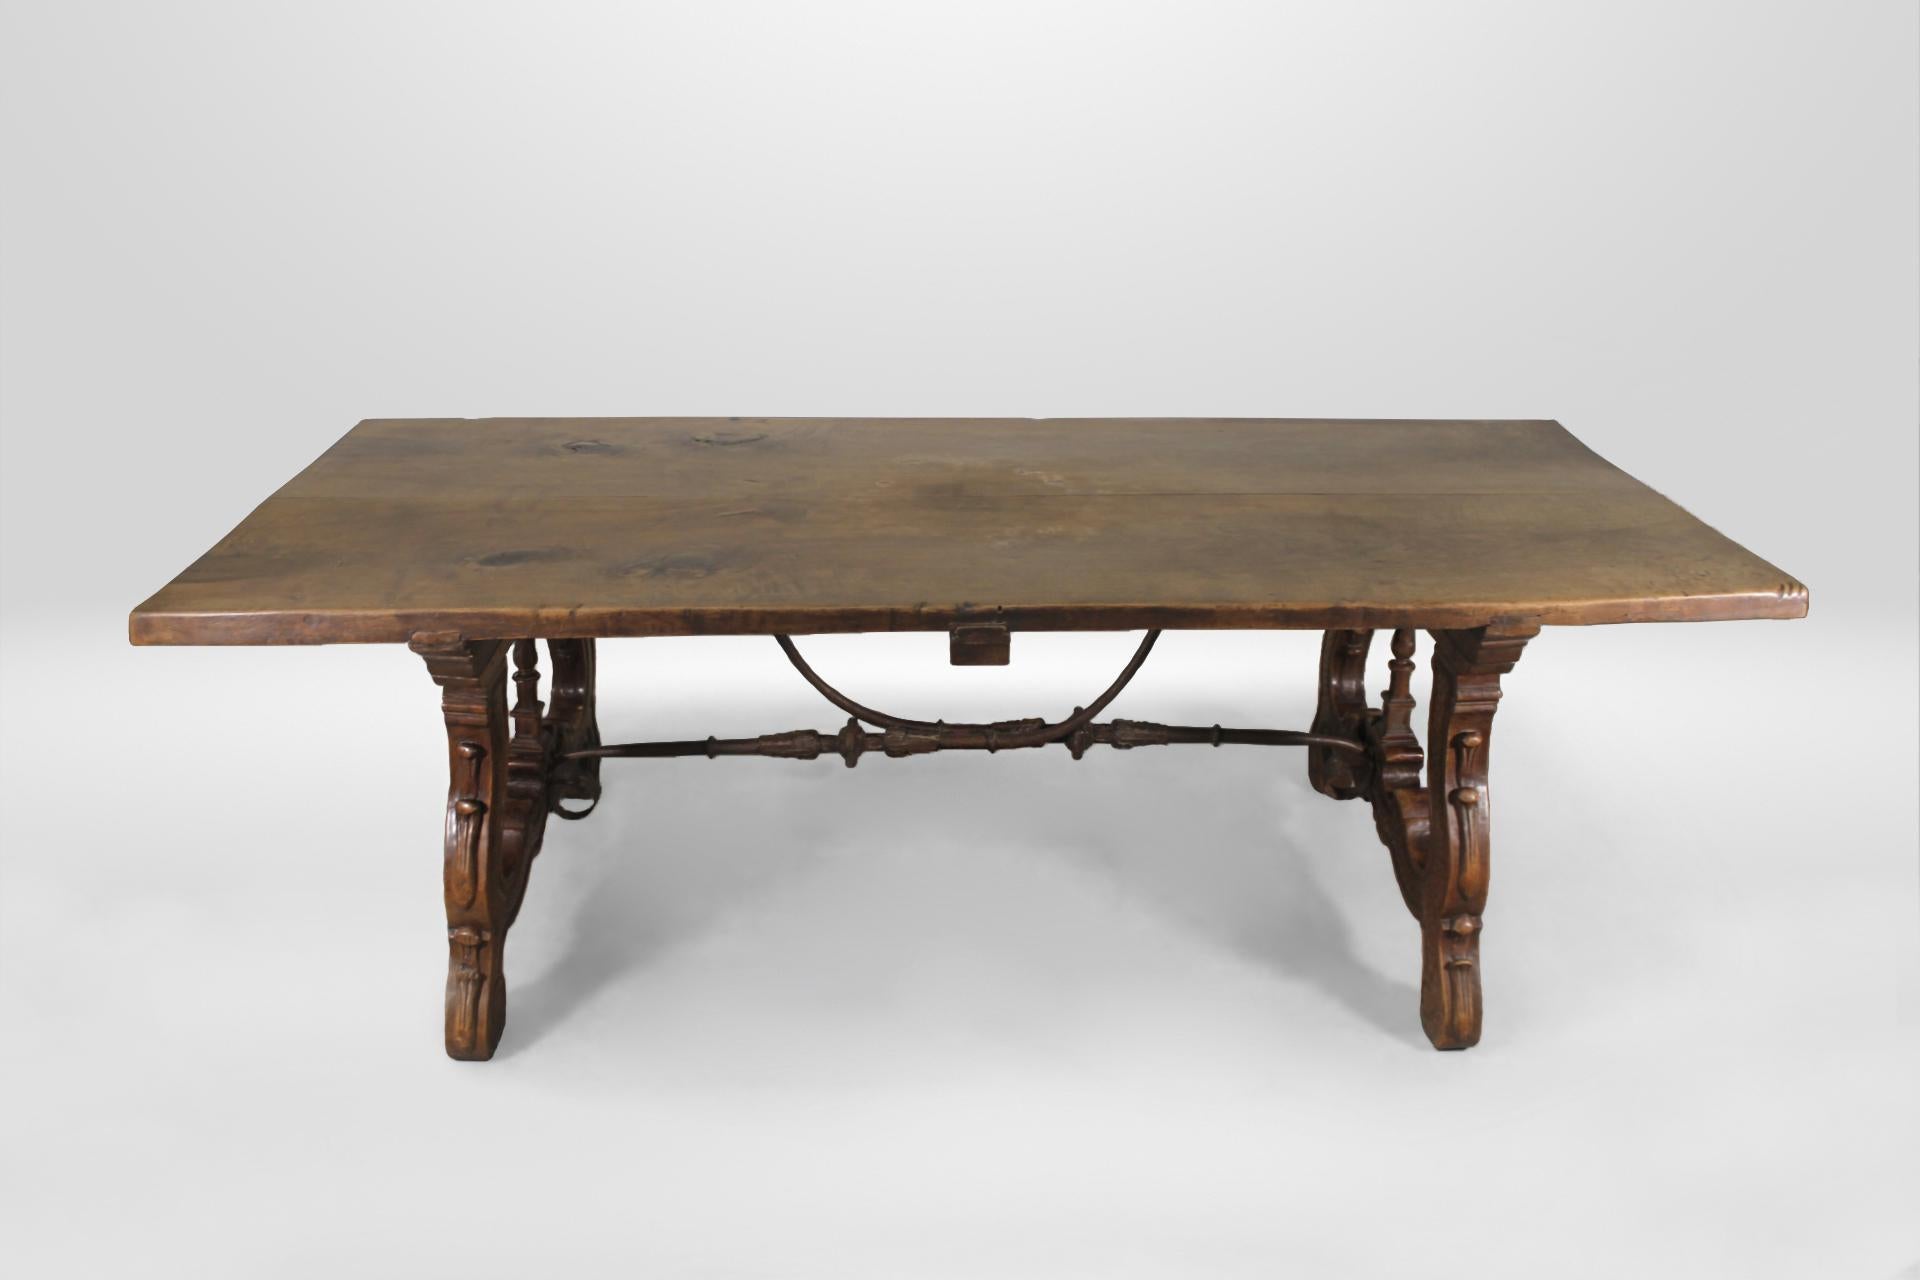 Hand-Carved Spanish Friar Table in “Liria” style made of Olive tree wood & Iron, s. XVIII For Sale